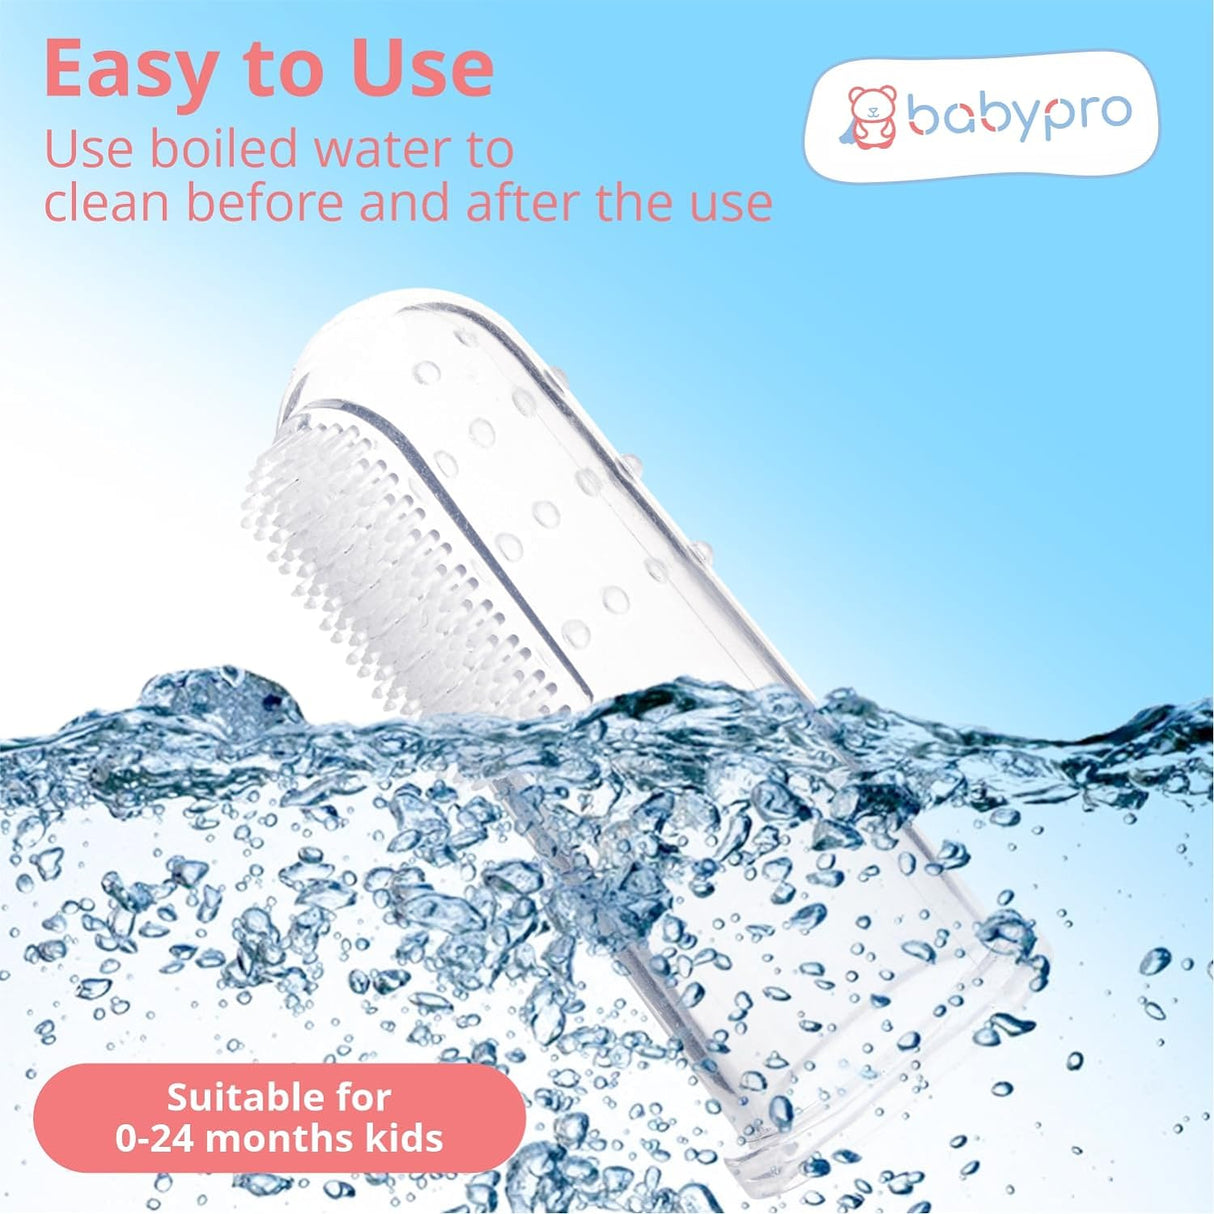 BabyPro Silicon Toothbrush, Pack of 1